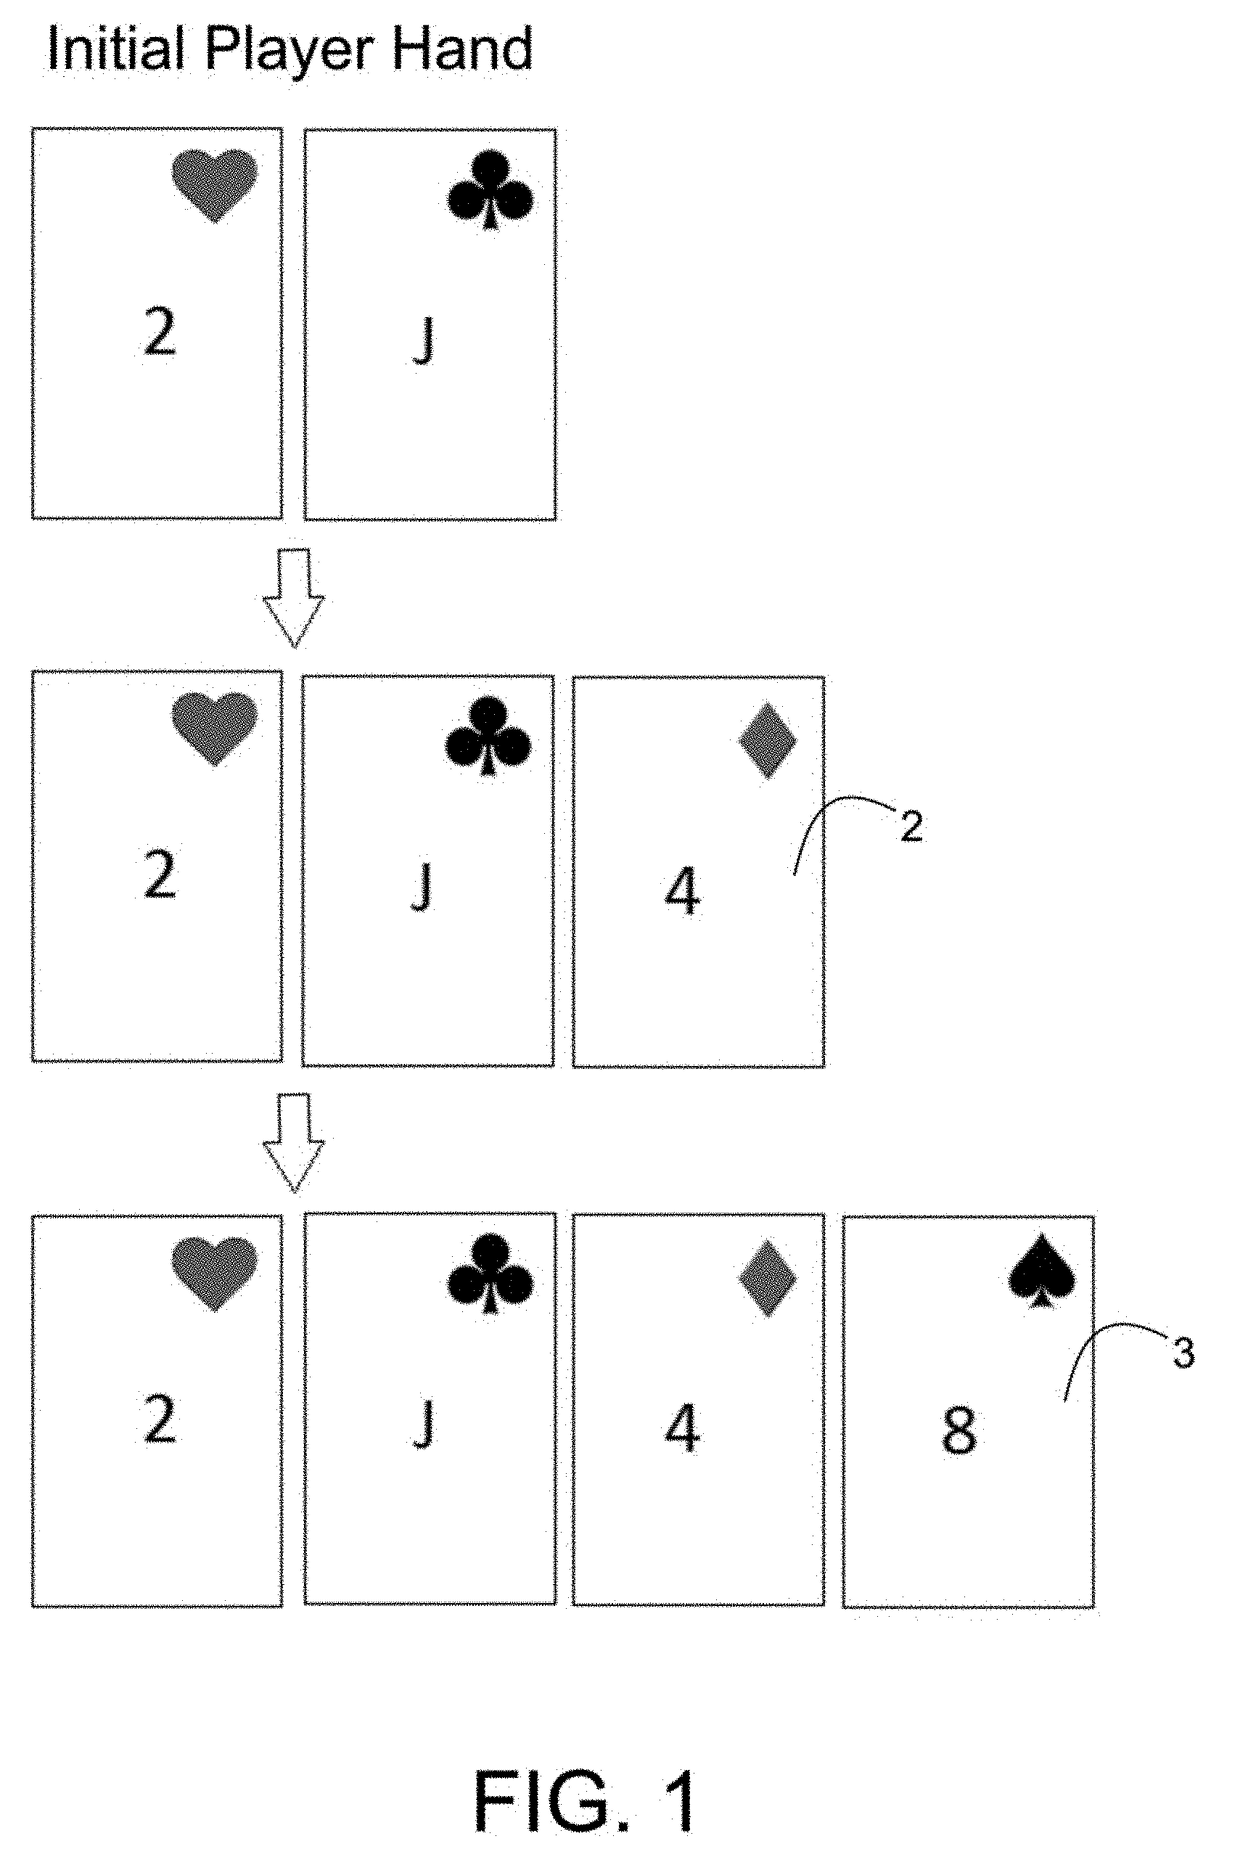 Series of playing card games based on the prediction of a player hand exceeding a numerical value of 21